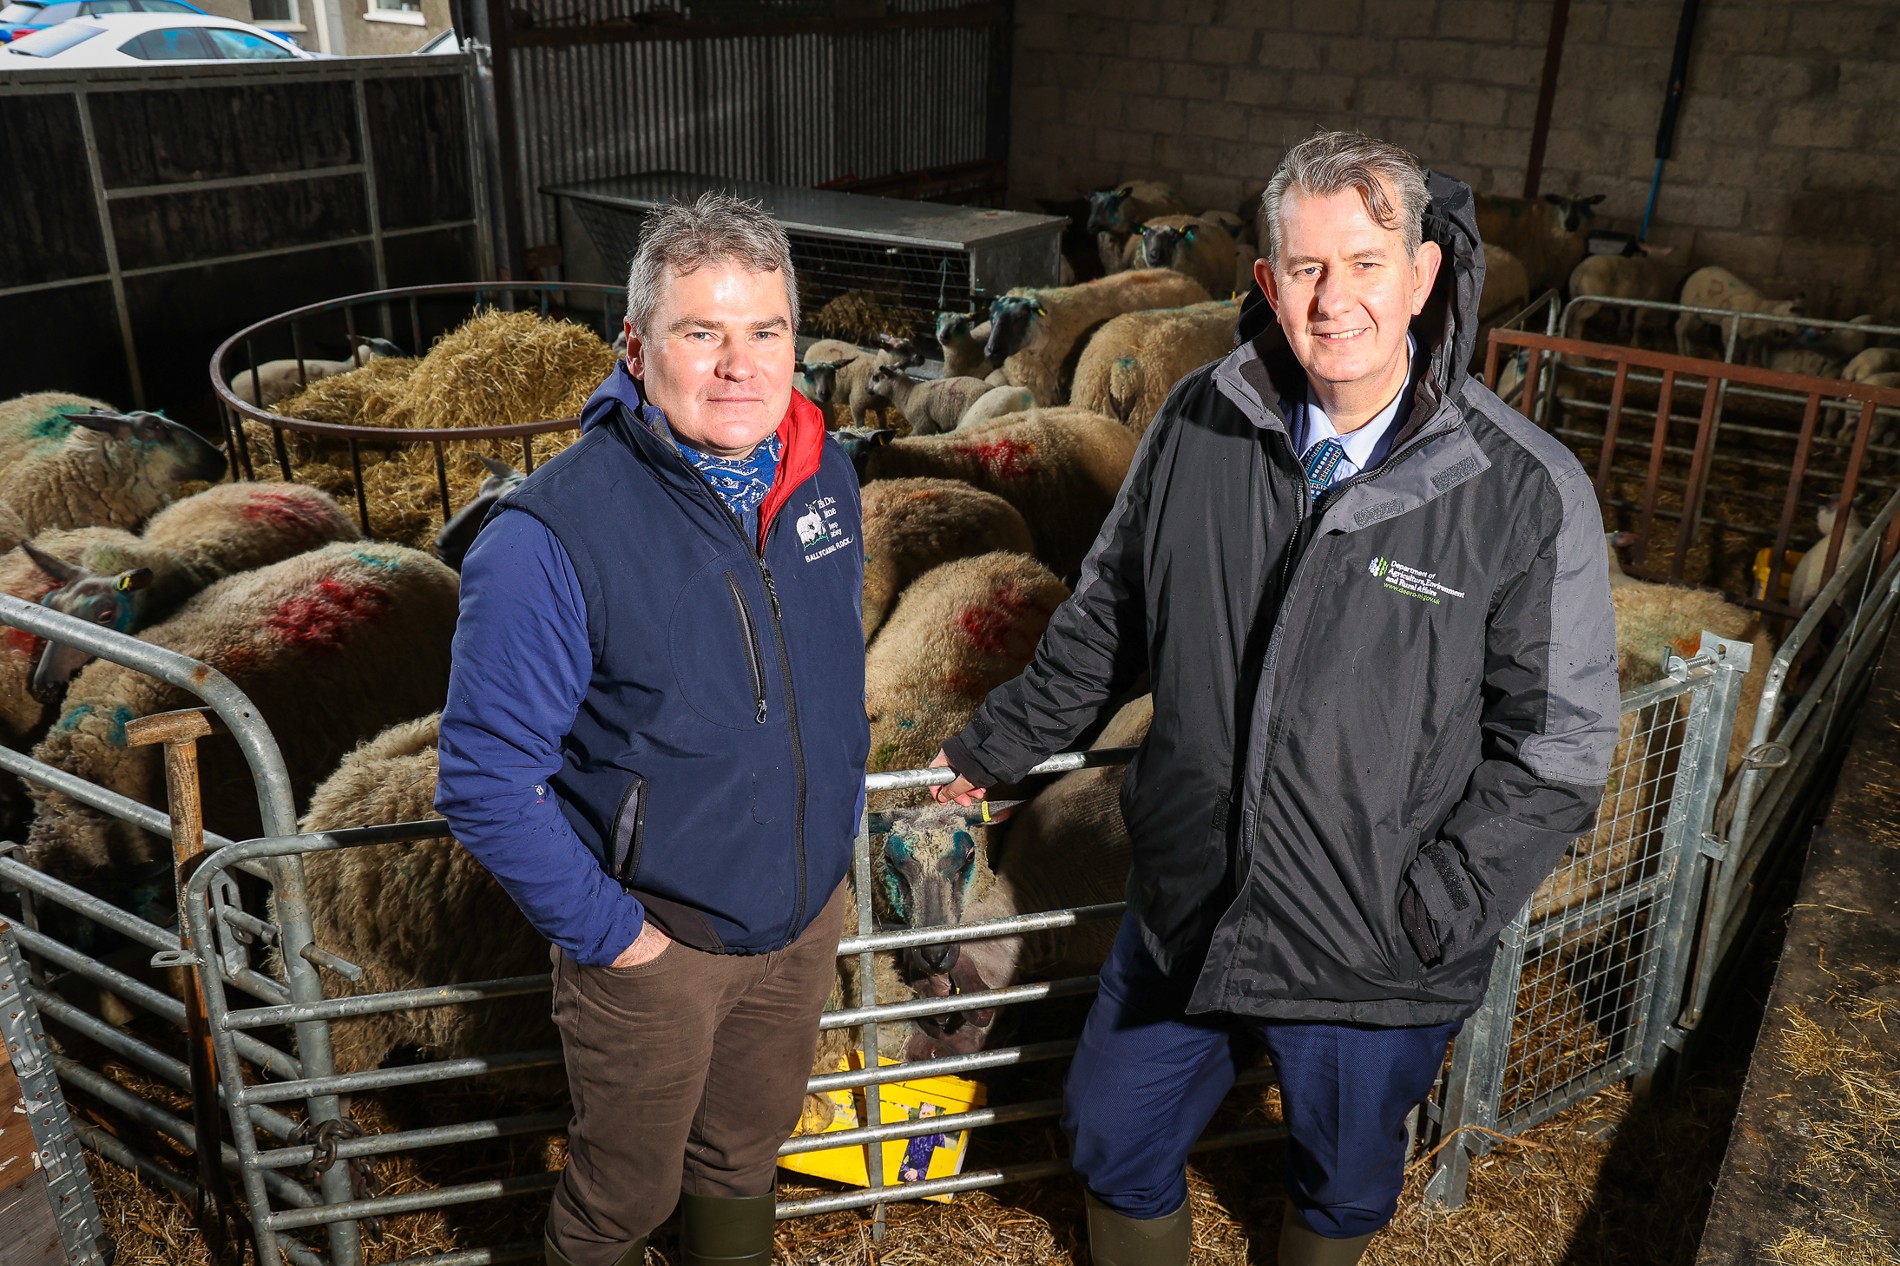 Farmers encouraged to apply for £300m Single Application funding